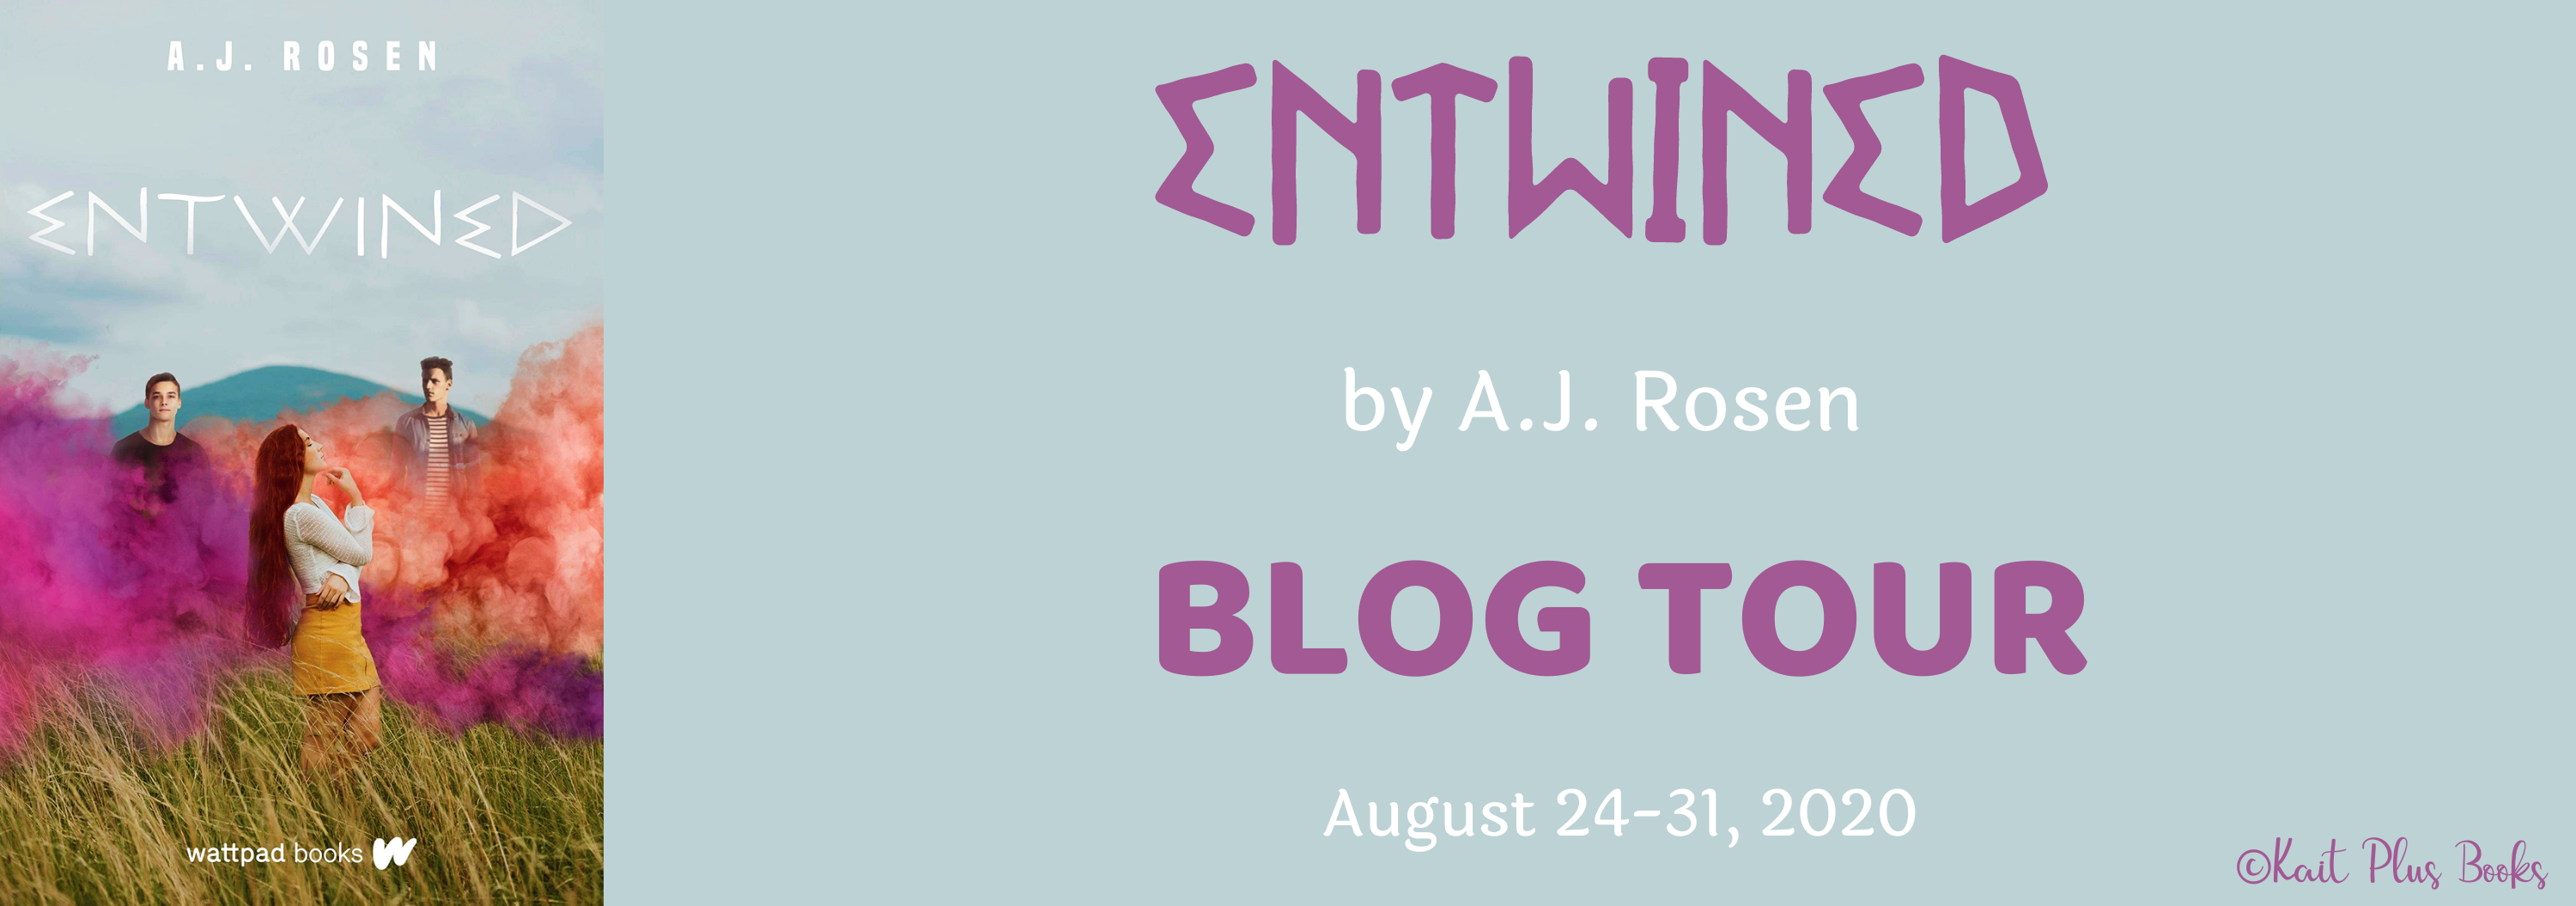 Blog Tour: Entwined by A.J. Rosen